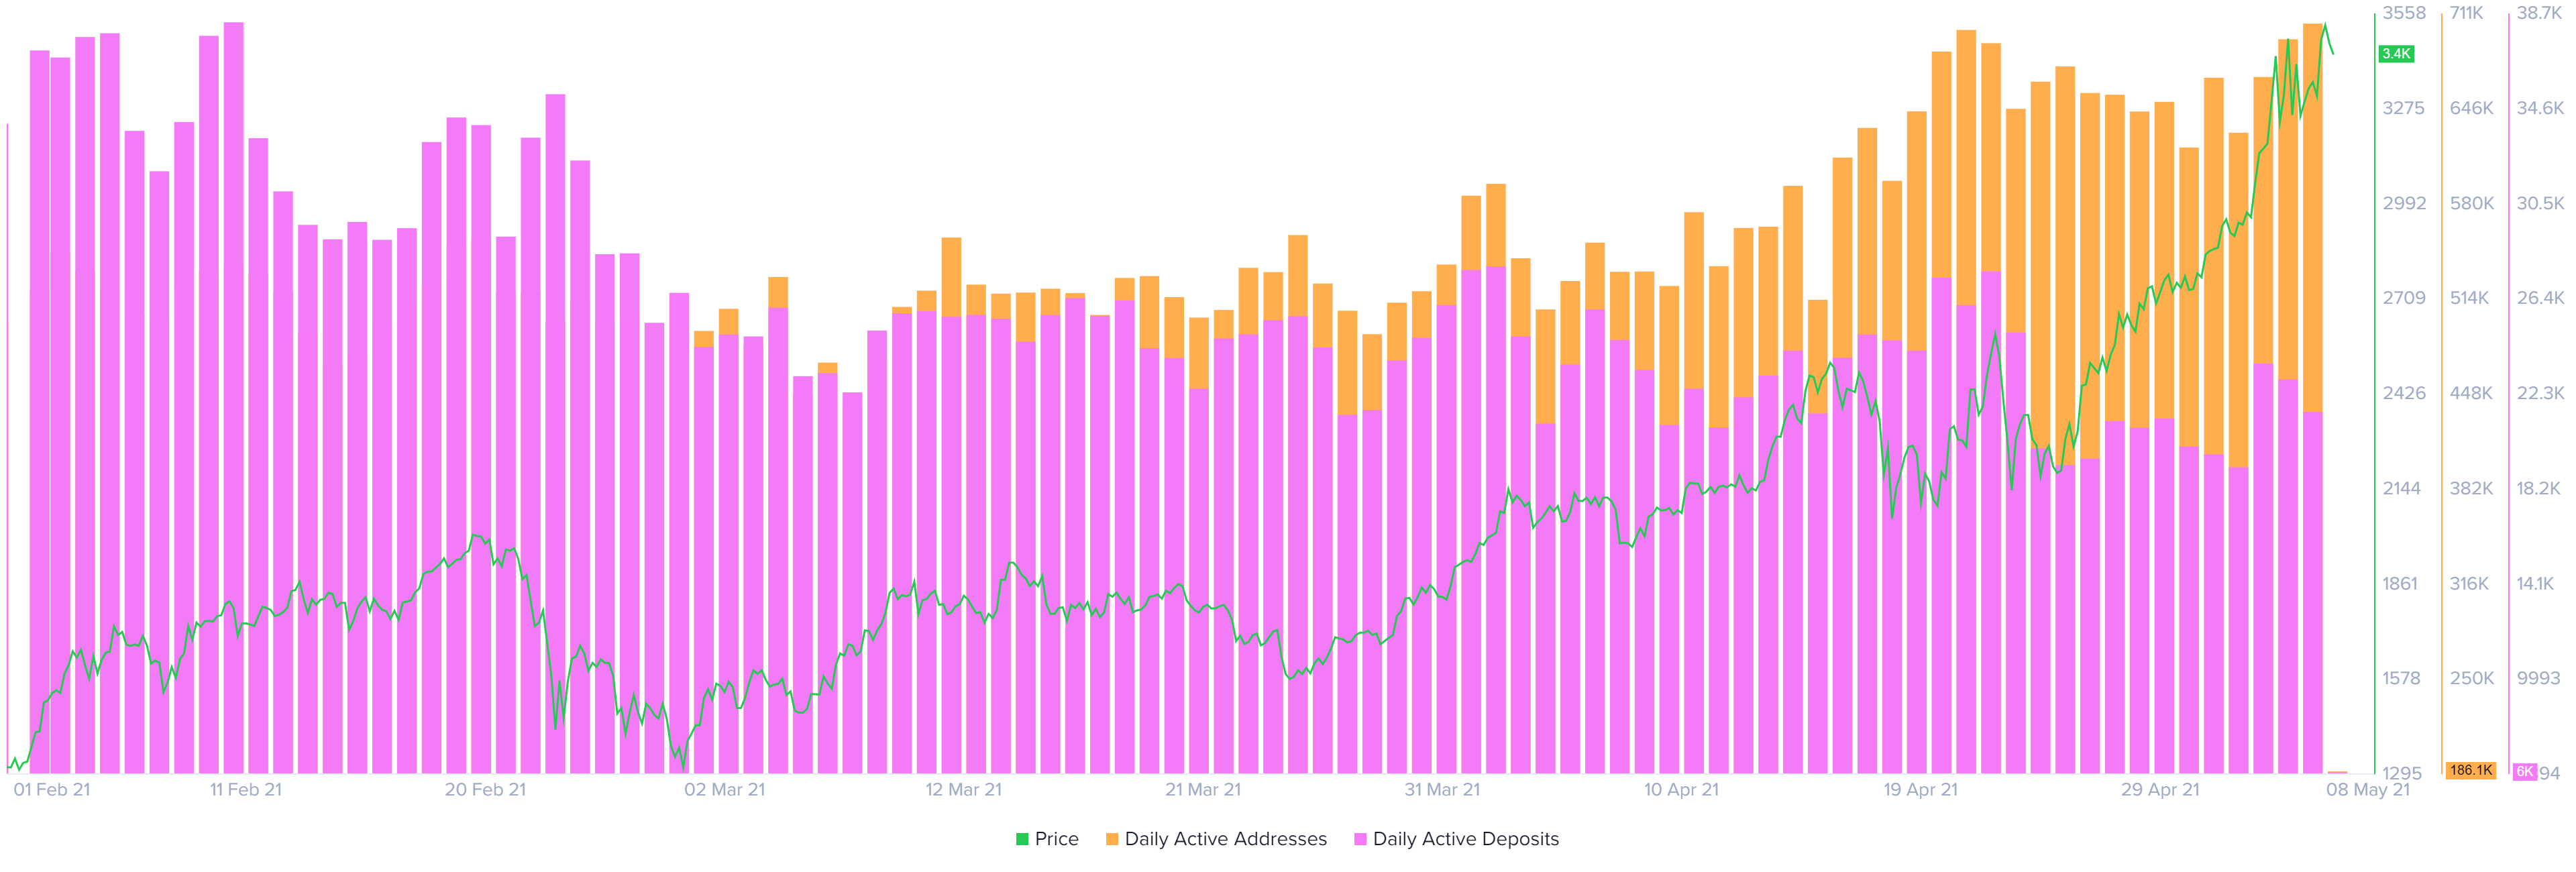 ETH daily active addresses/deposits chart